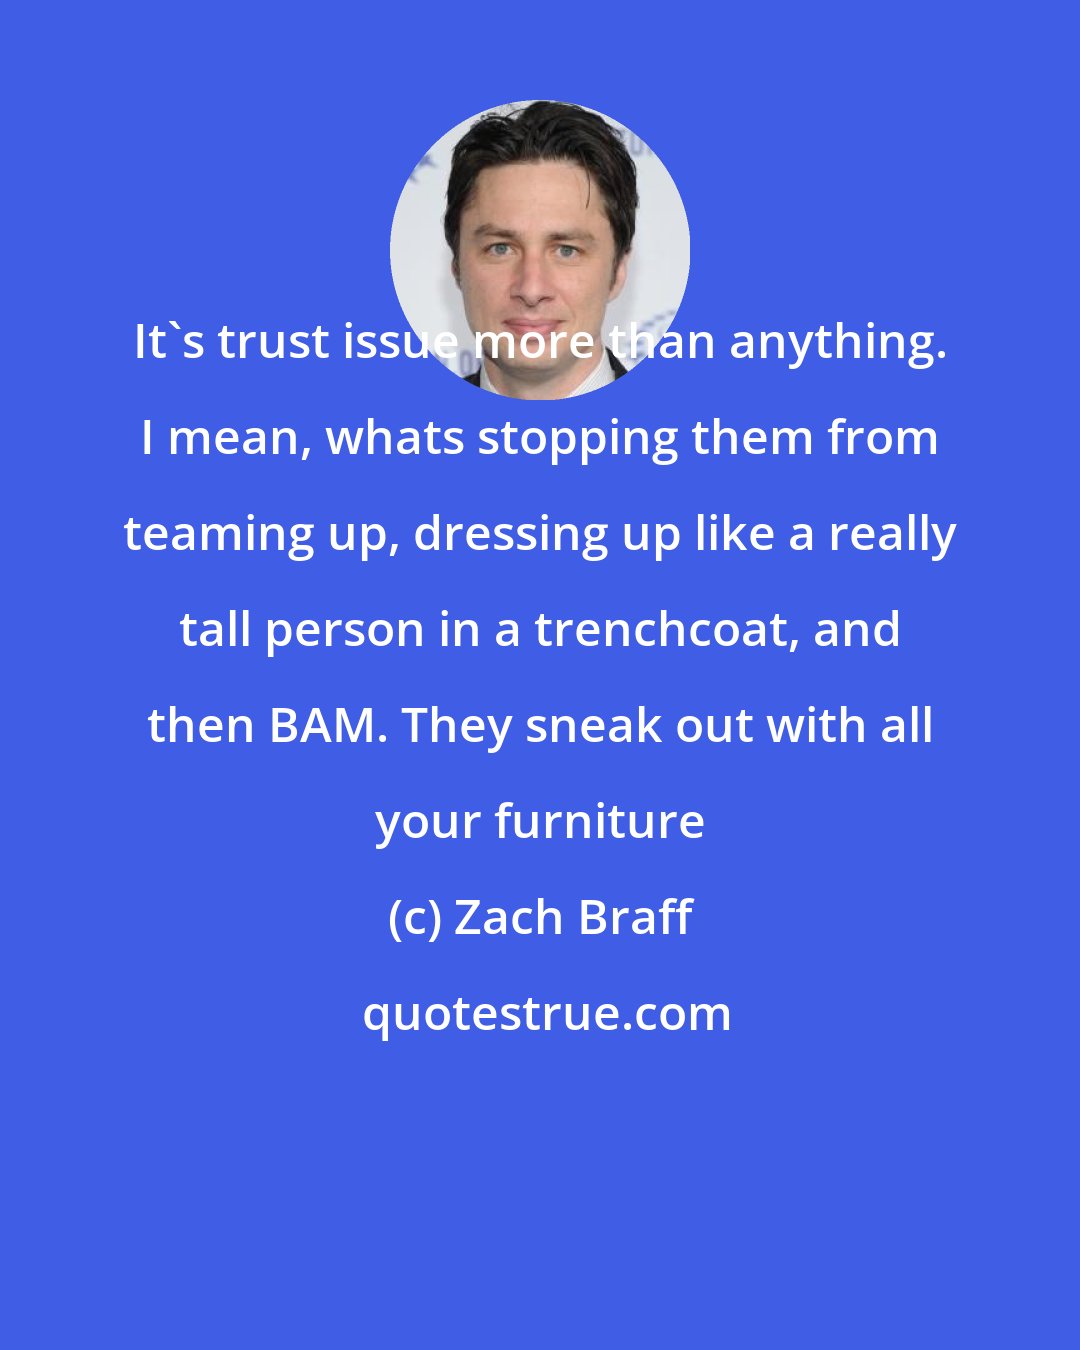 Zach Braff: It's trust issue more than anything. I mean, whats stopping them from teaming up, dressing up like a really tall person in a trenchcoat, and then BAM. They sneak out with all your furniture